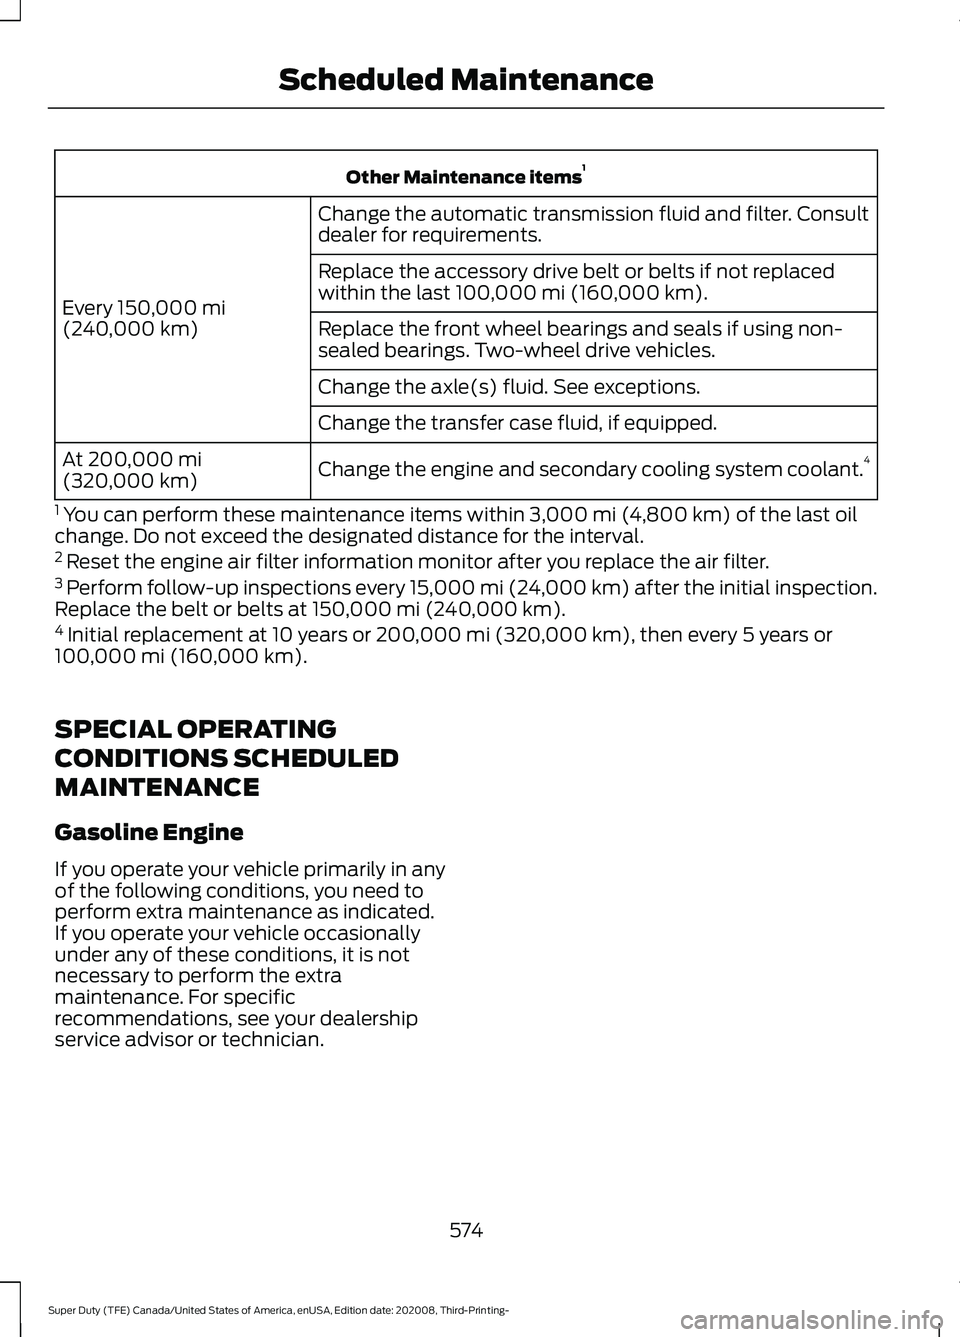 FORD F-450 2021  Owners Manual Other Maintenance items
1
Change the automatic transmission fluid and filter. Consult
dealer for requirements.
Every 150,000 mi
(240,000 km) Replace the accessory drive belt or belts if not replaced
w